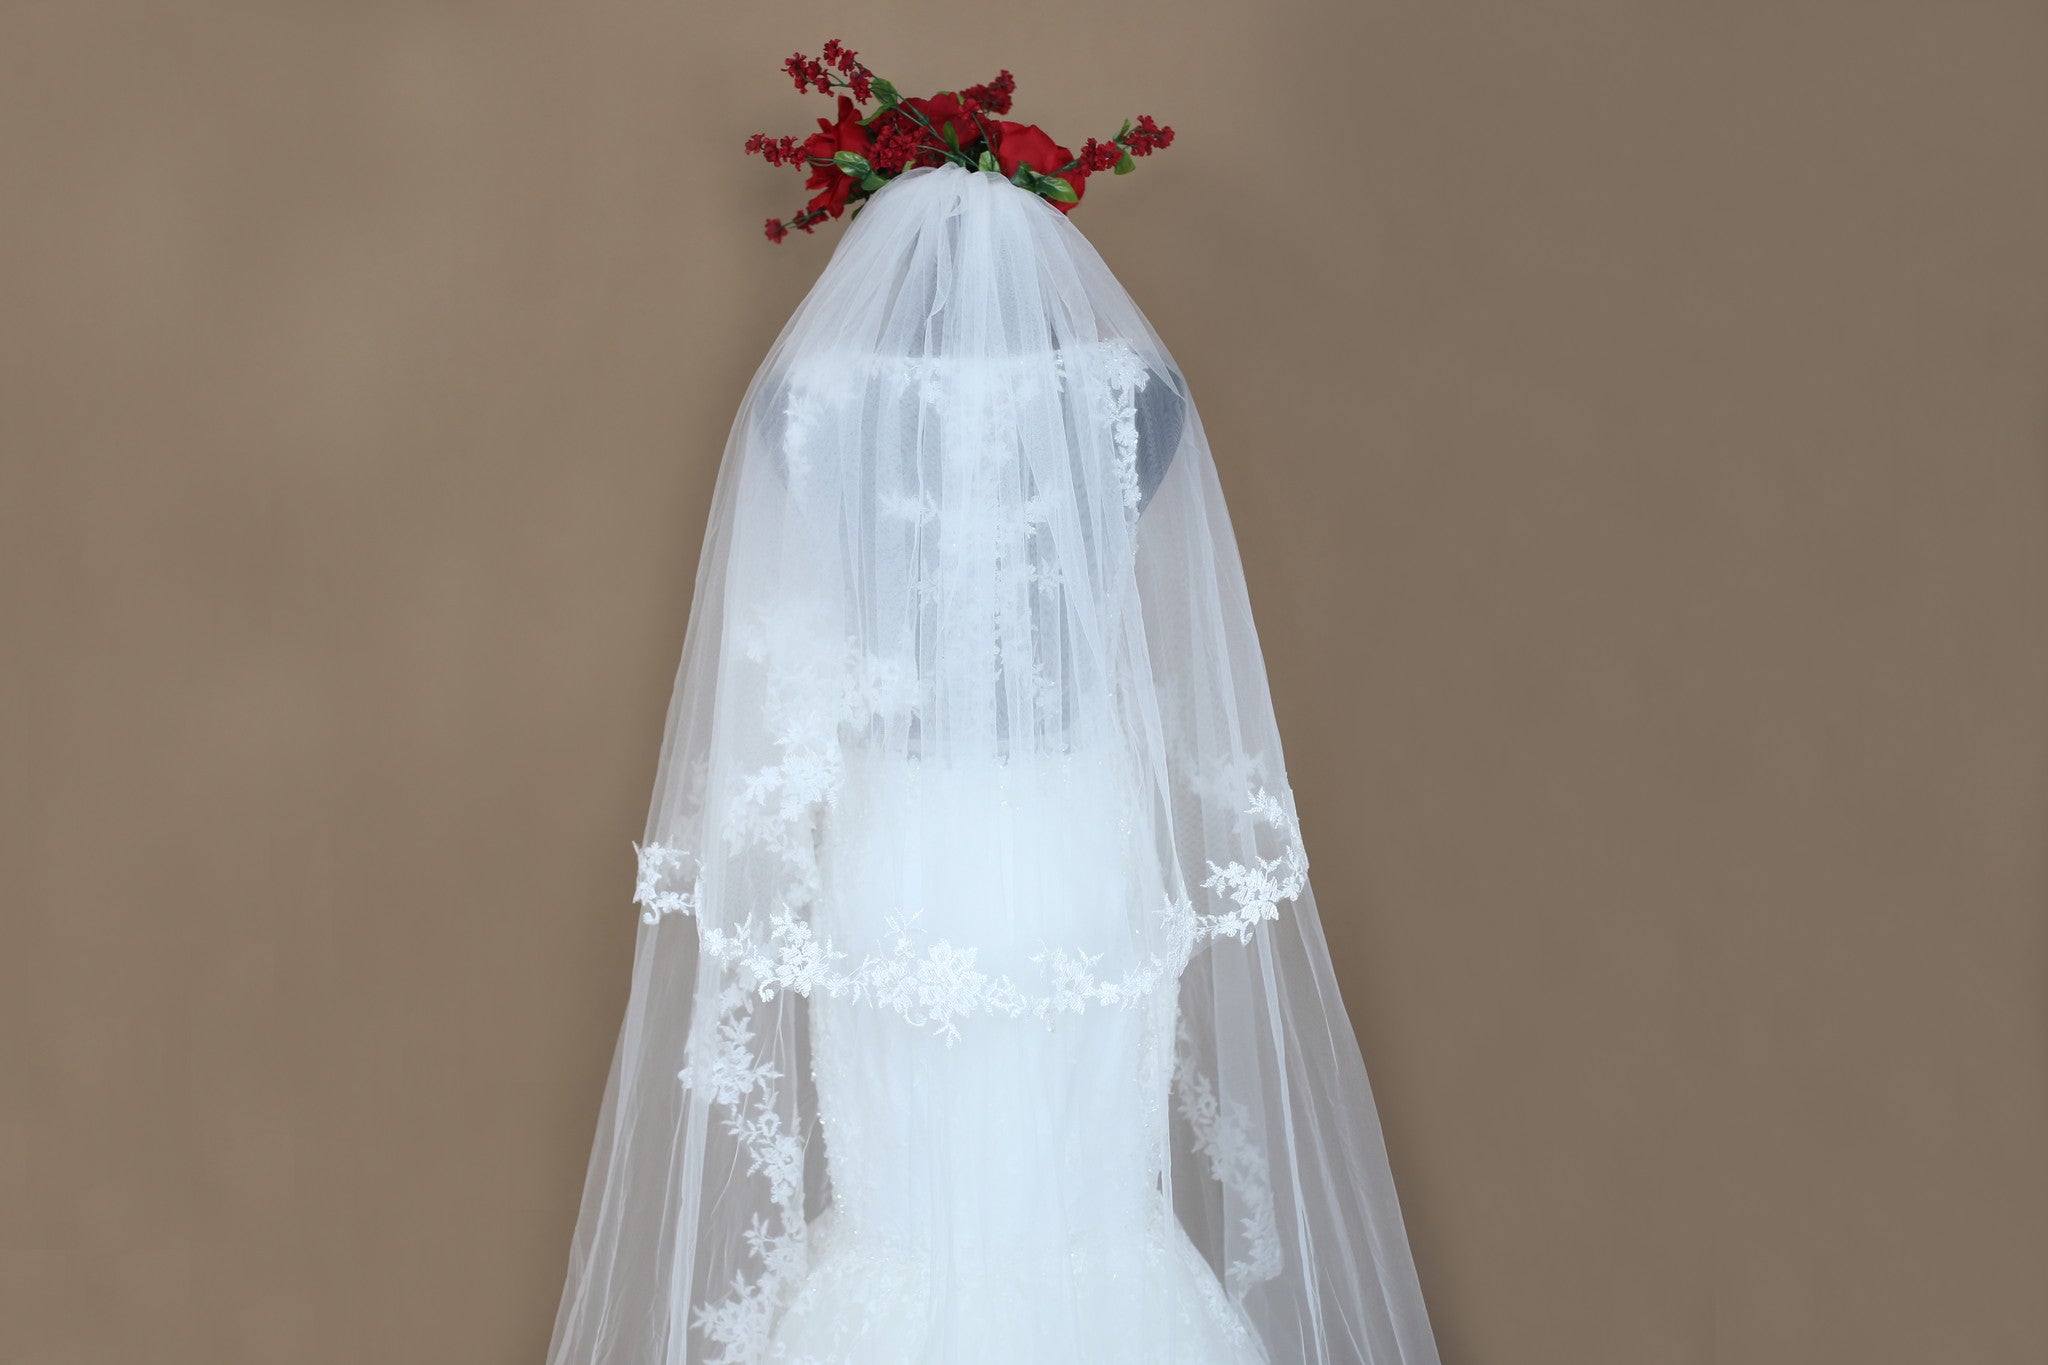 Floral Lace Wedding Veil with Blusher (#Danica)